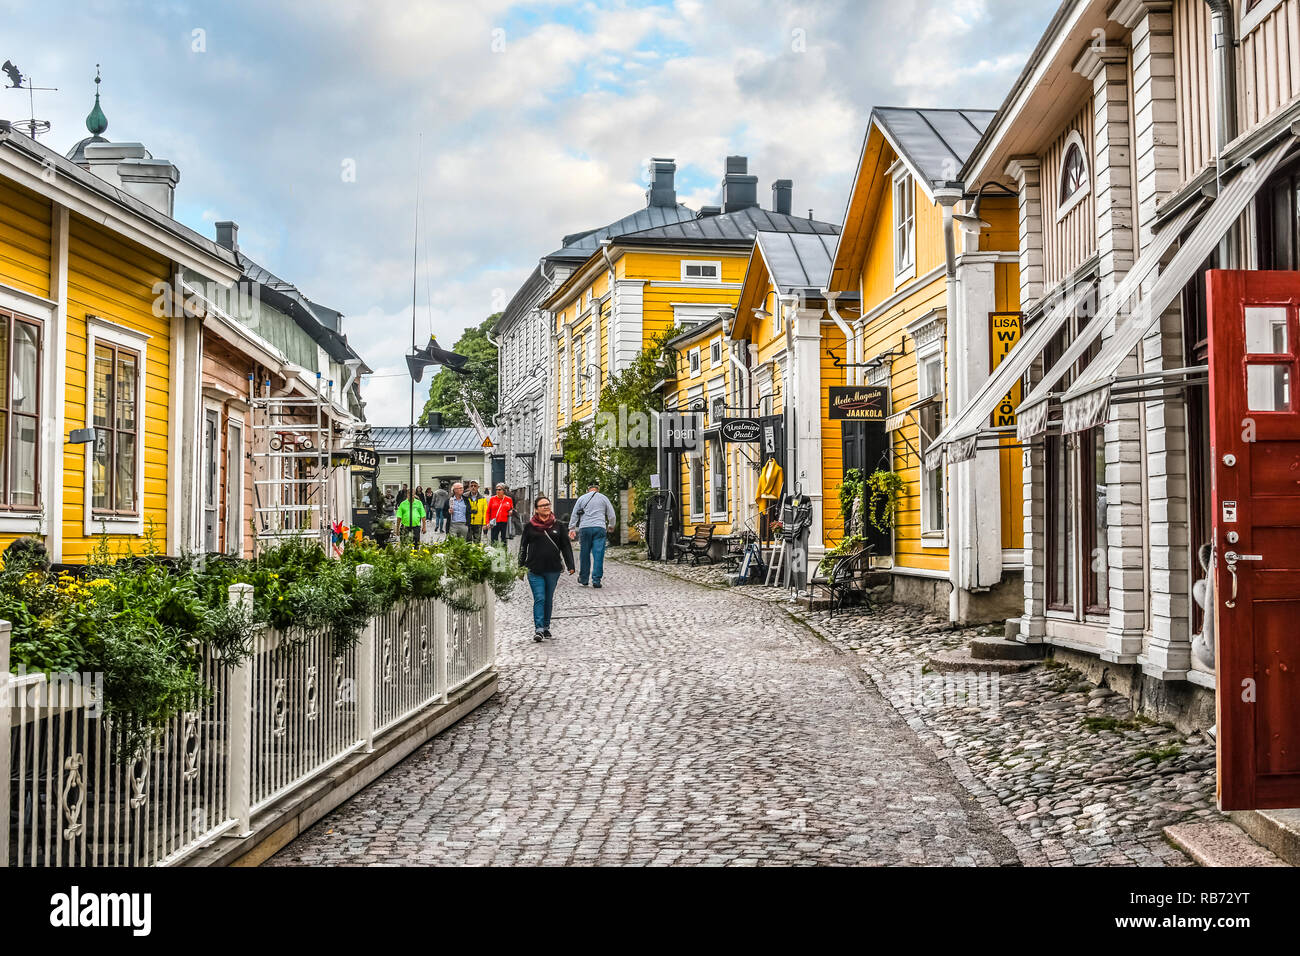 Tourists and local Finns walk past shops along the cobbled streets of the medieval old town section of Porvoo, Finland. Stock Photo